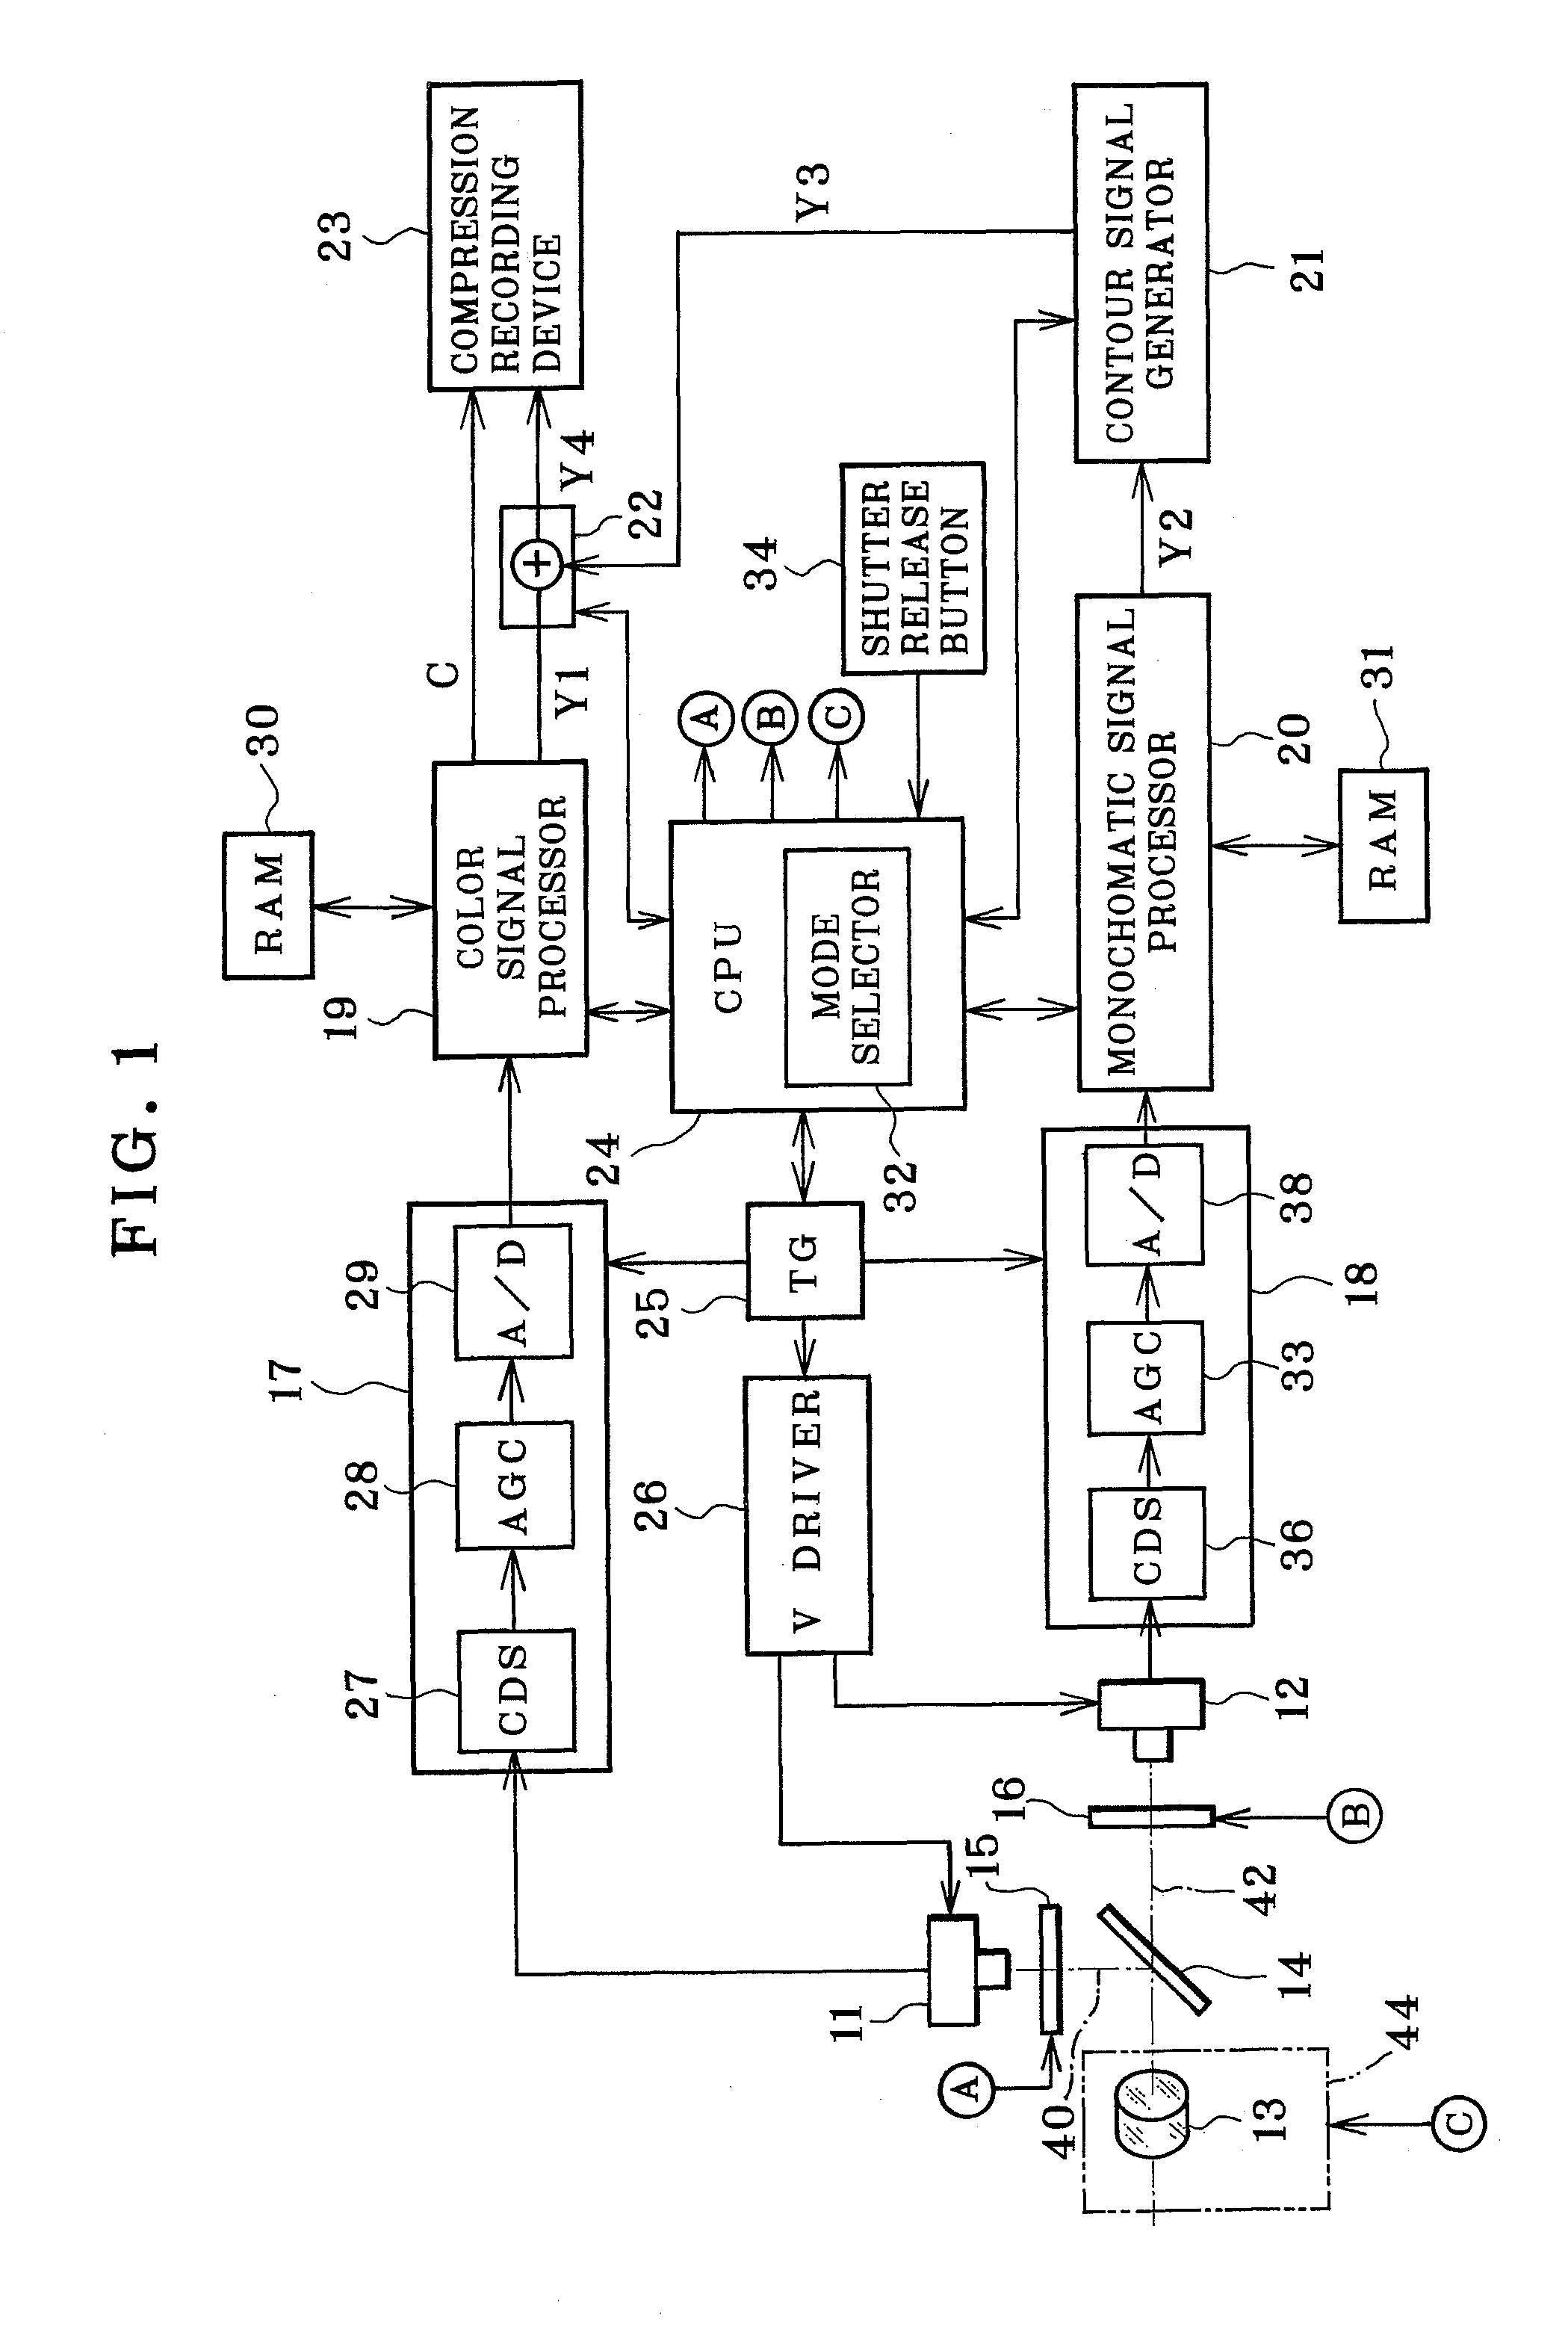 Image pickup apparatus and method using visible light and infrared